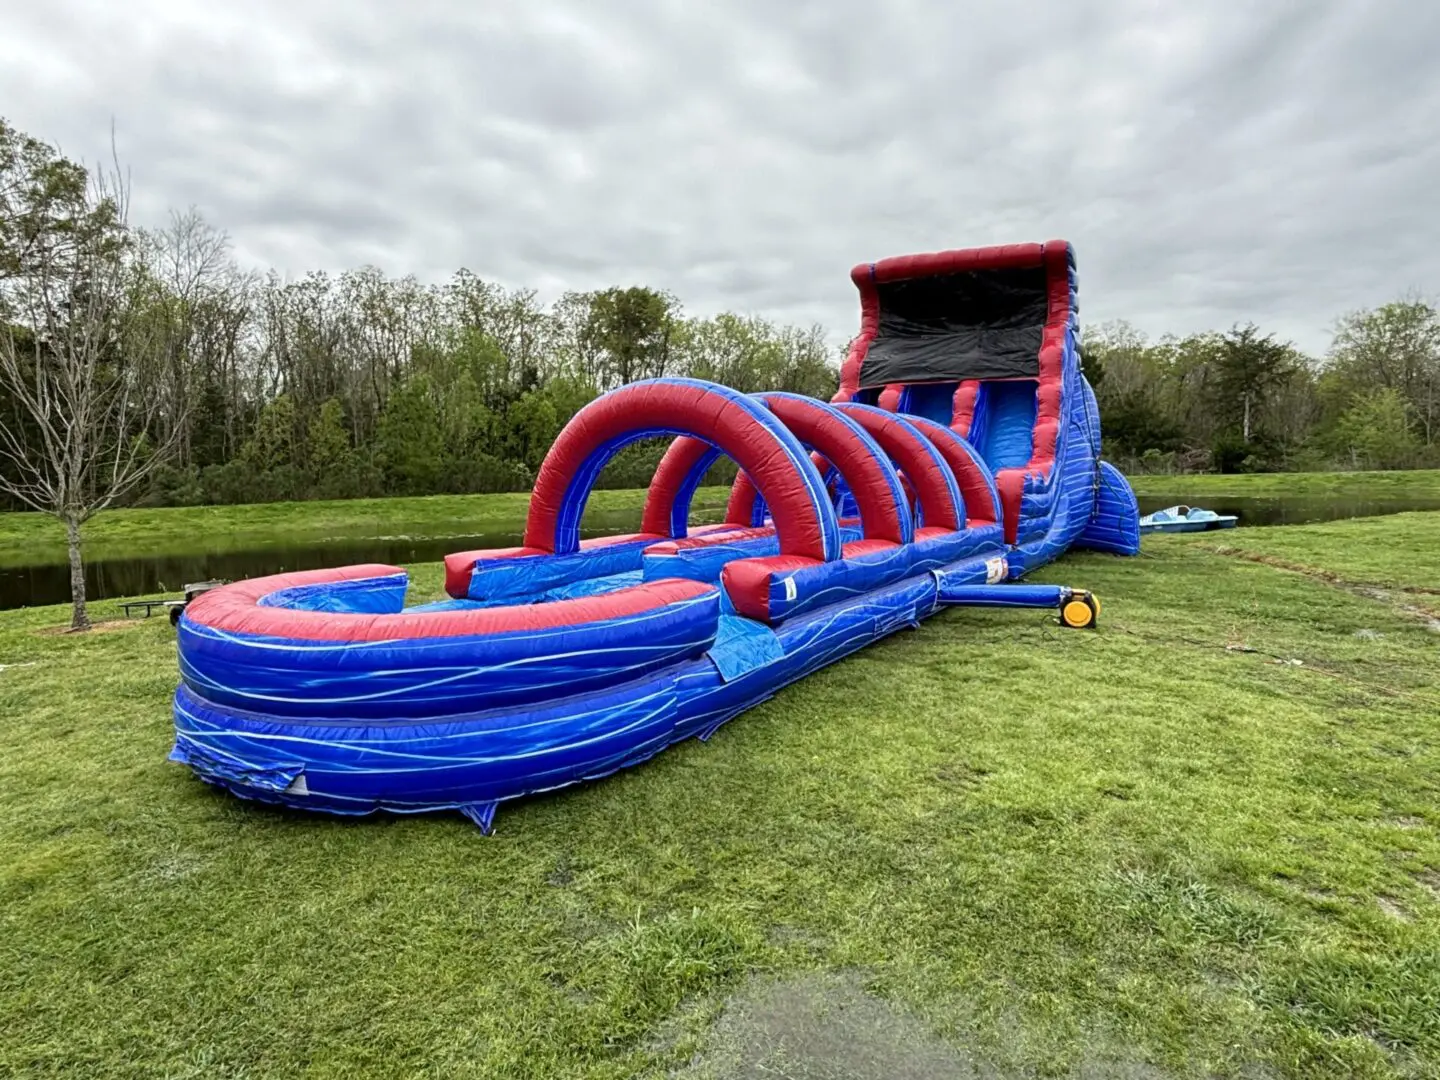 A large inflatable water slide in the grass.